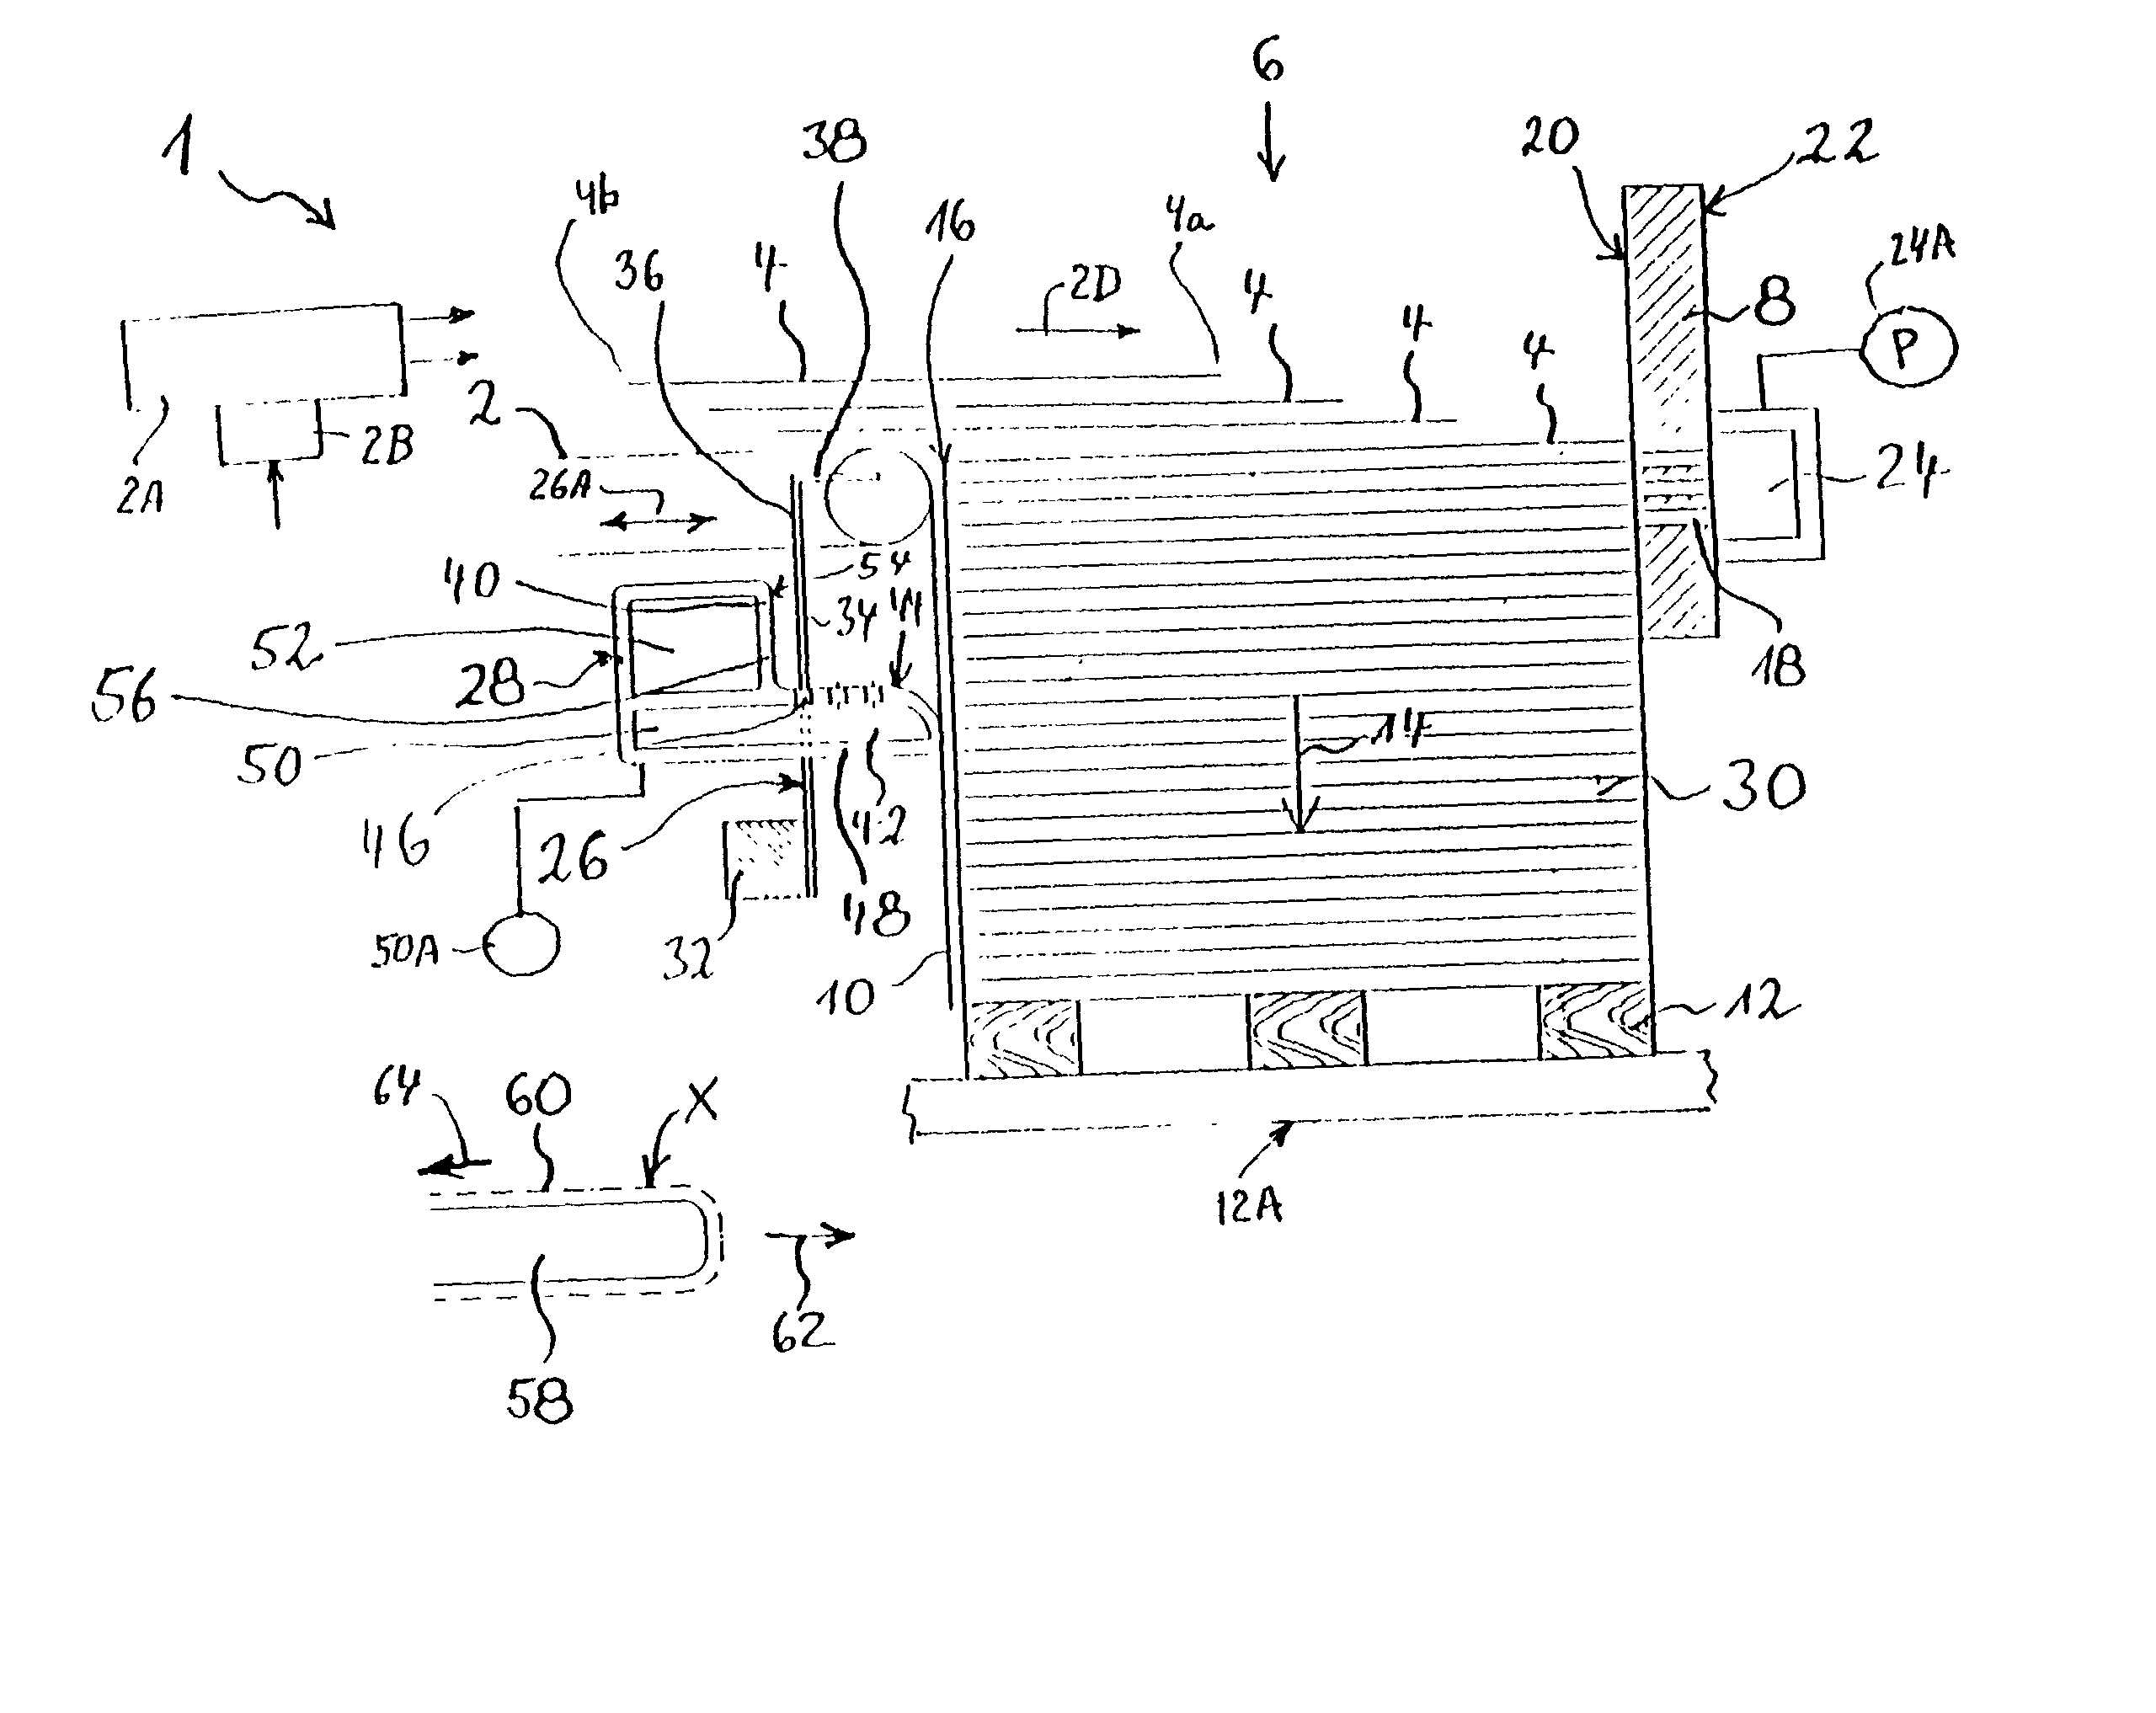 Method of and apparatus for accumulating successive stacks of superimposed sheets